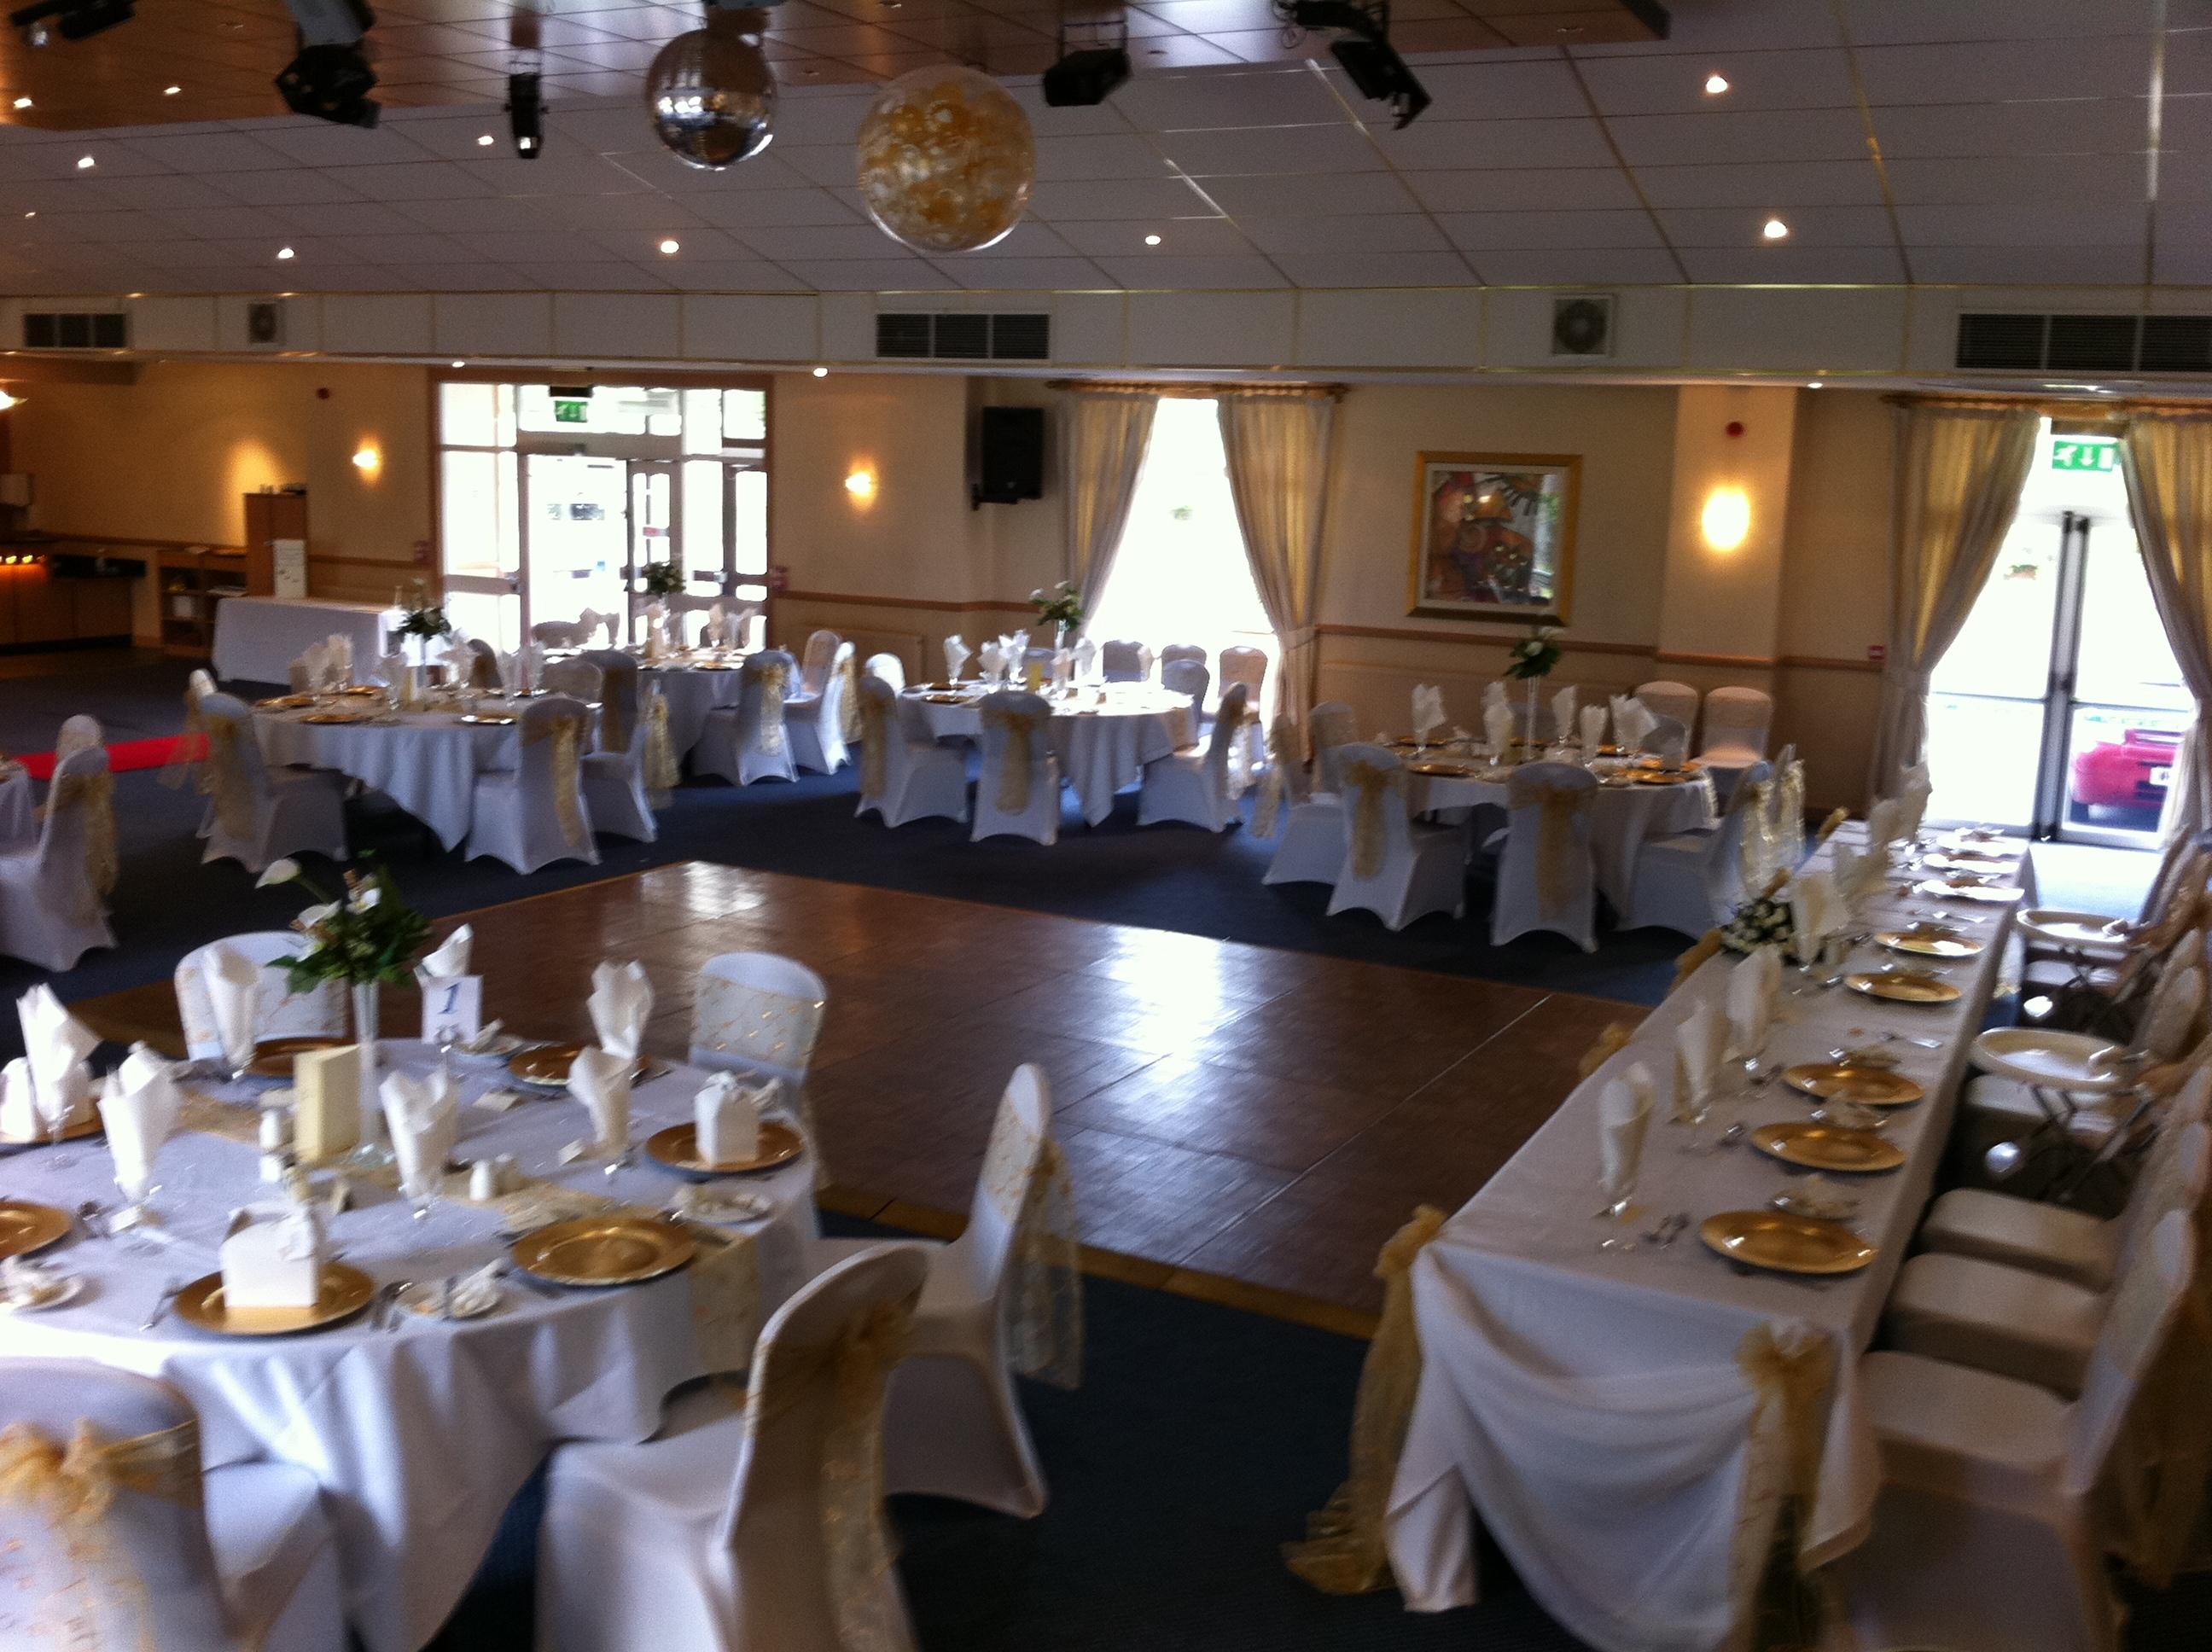 Bluebell Banqueting Suite, The Fairway And Bluebell Banqueting Suite photo #1